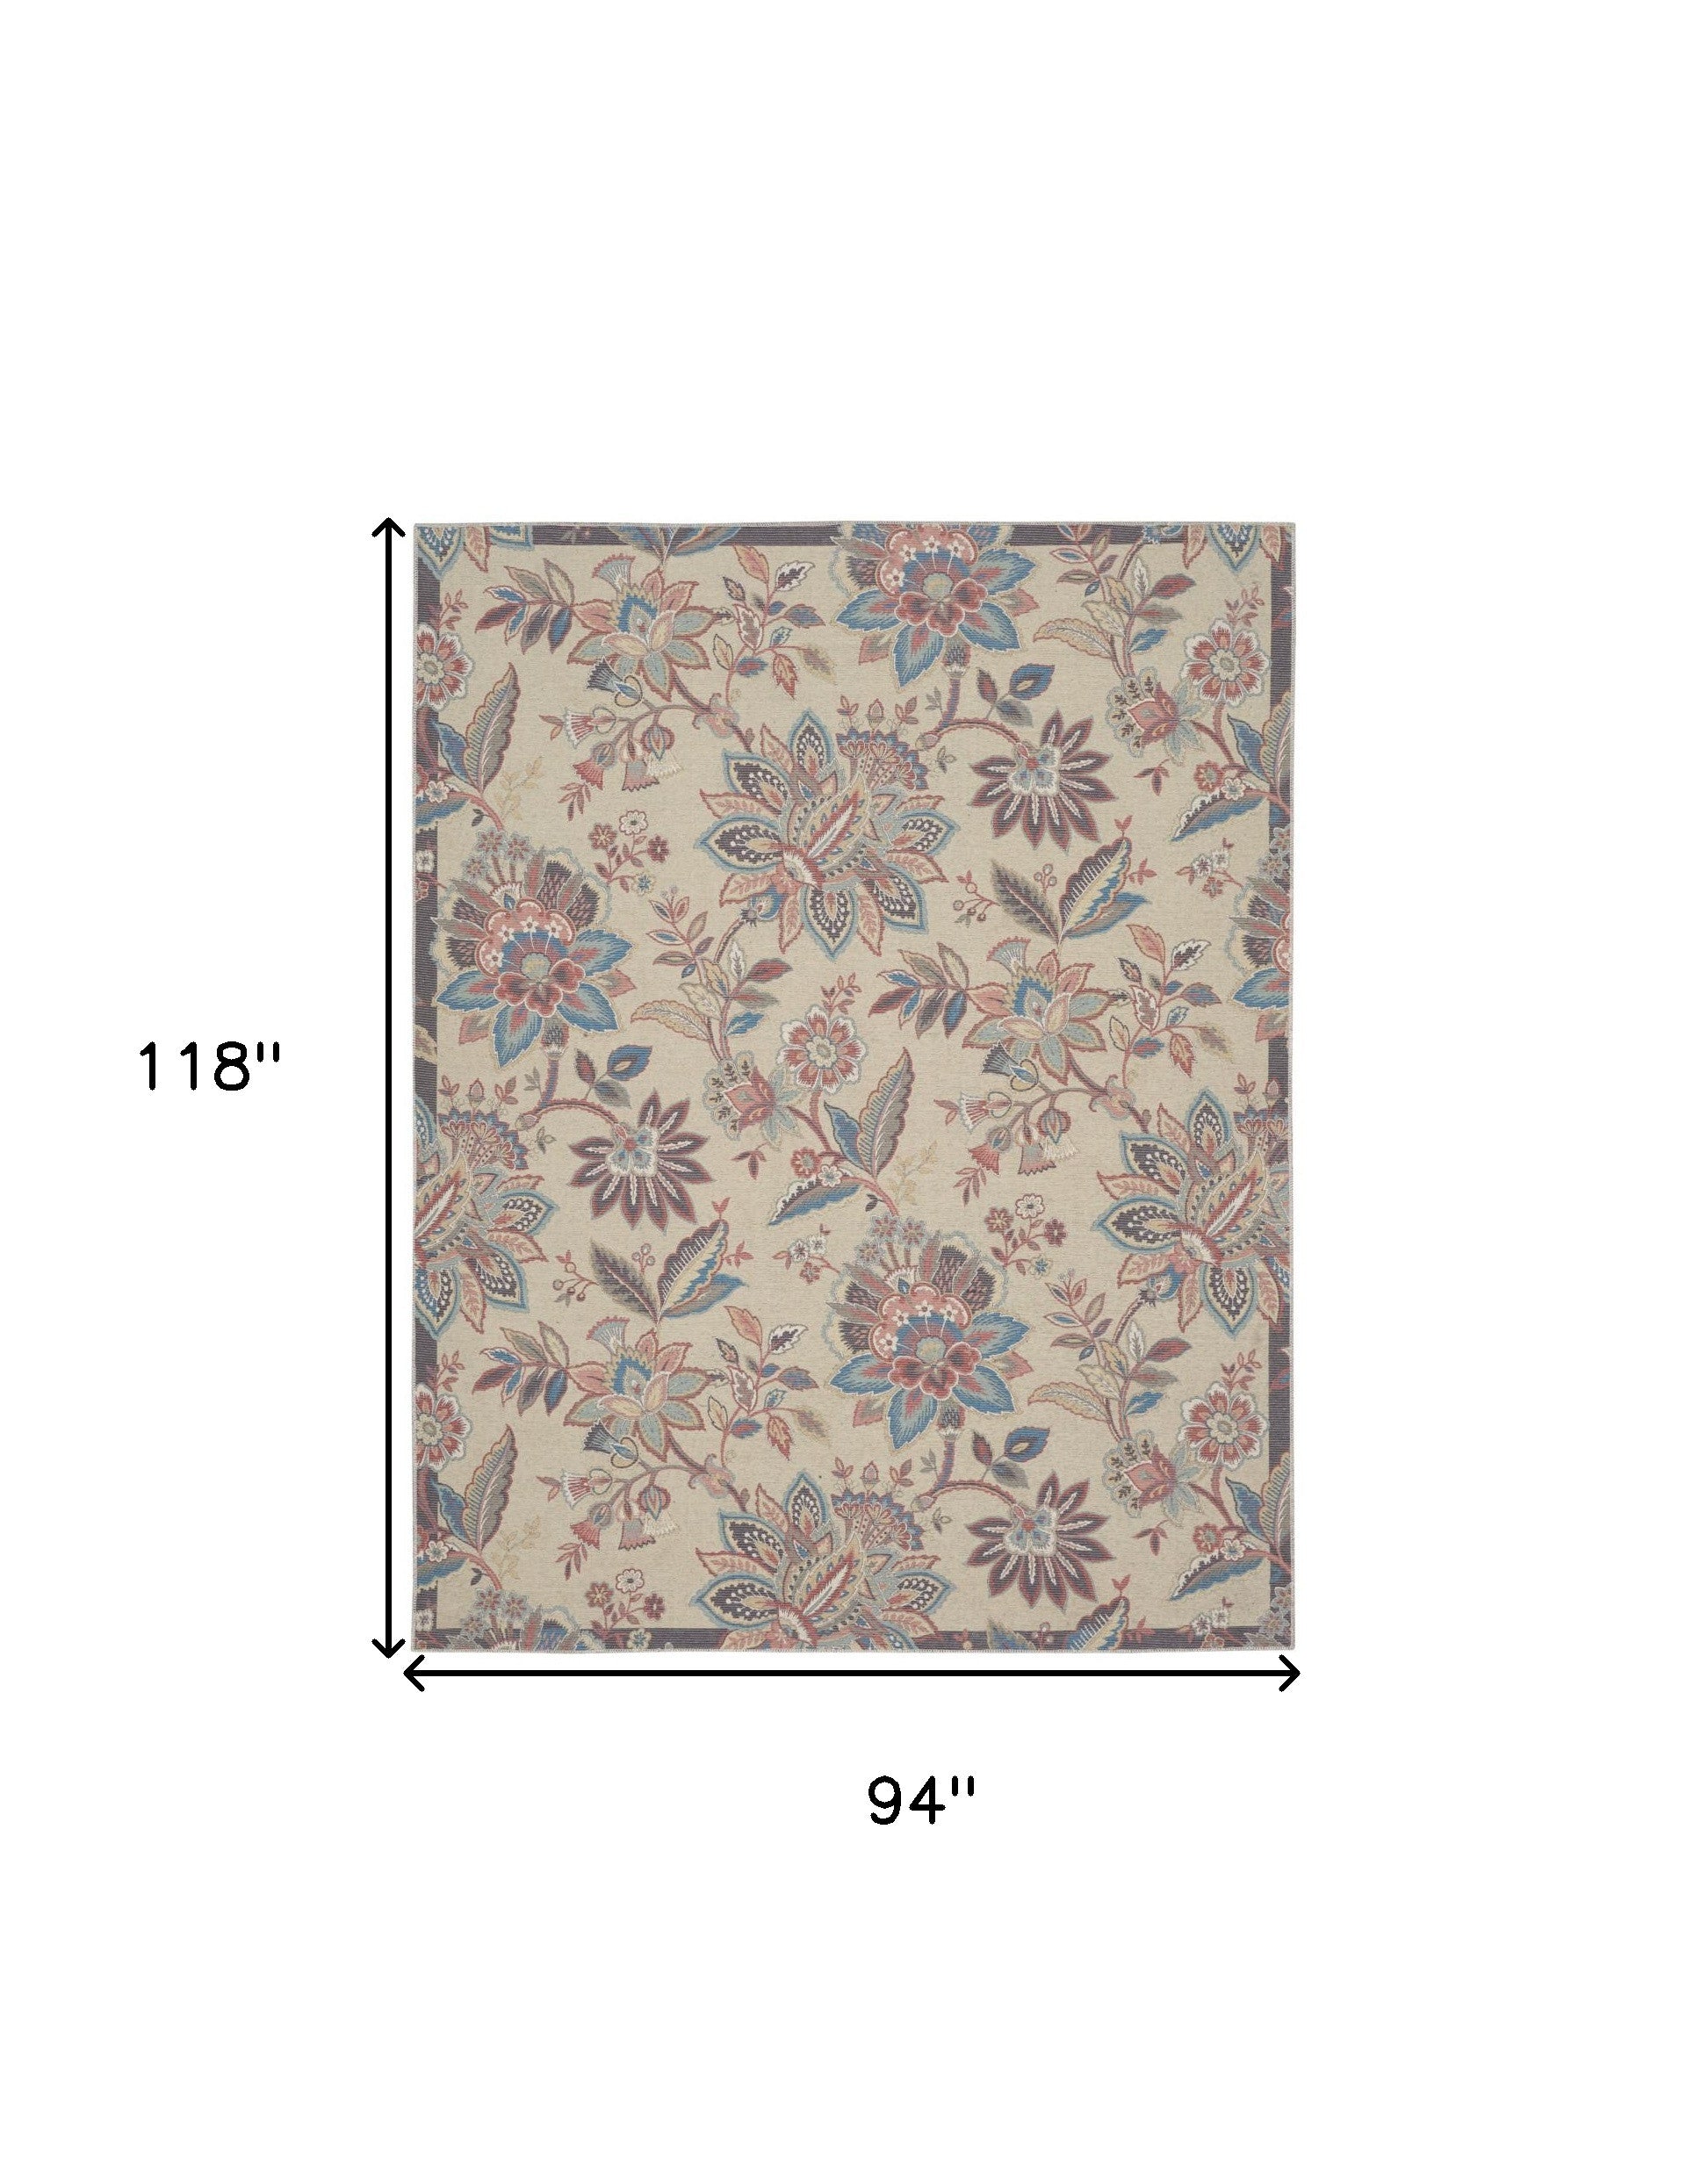 8' X 10' Beige Floral Distressed Washable Area Rug